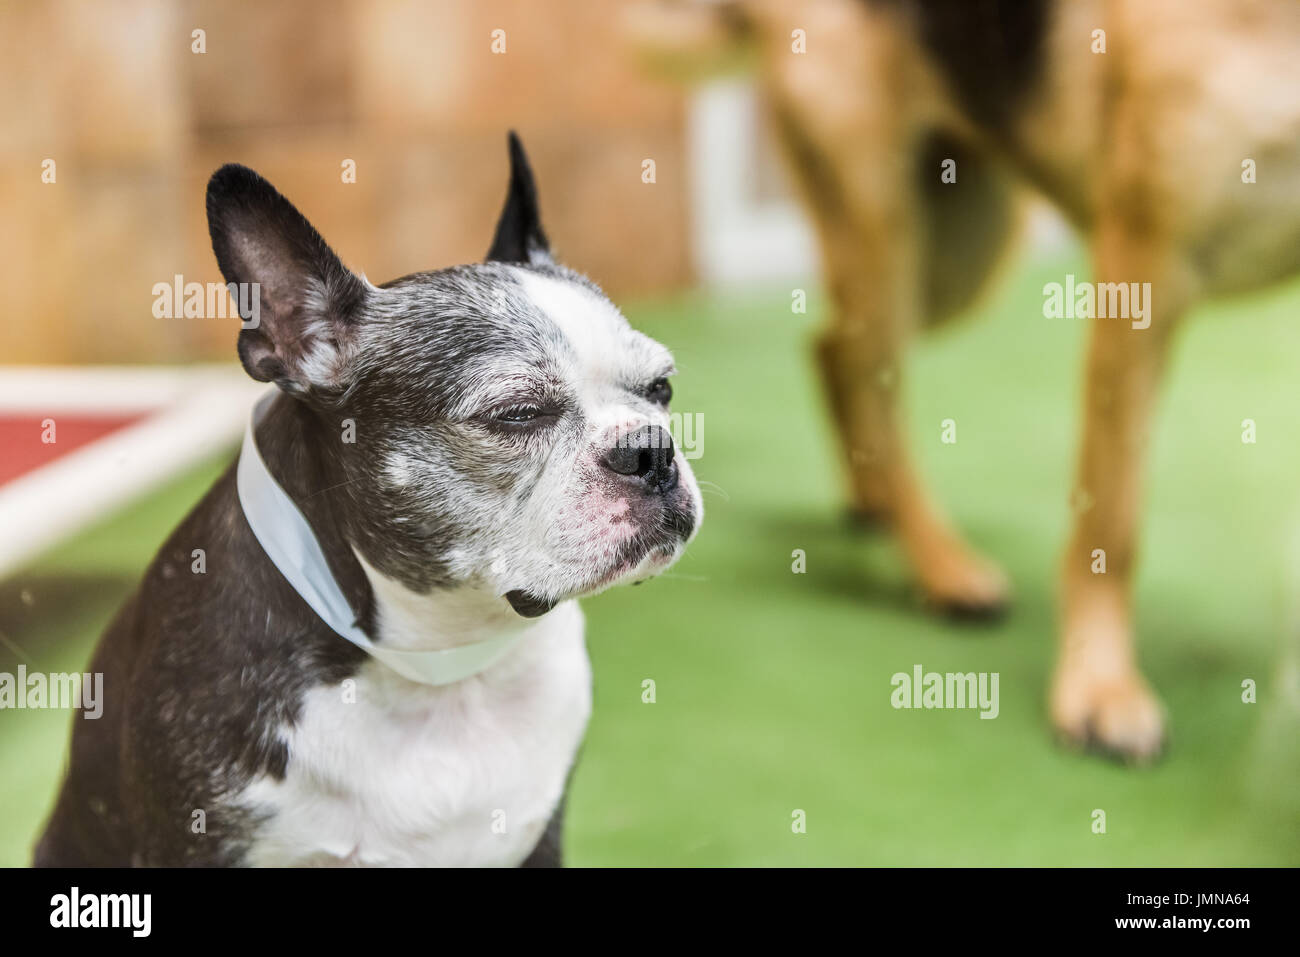 Closeup of boston terrier dog squinting eyes in training facility Stock Photo